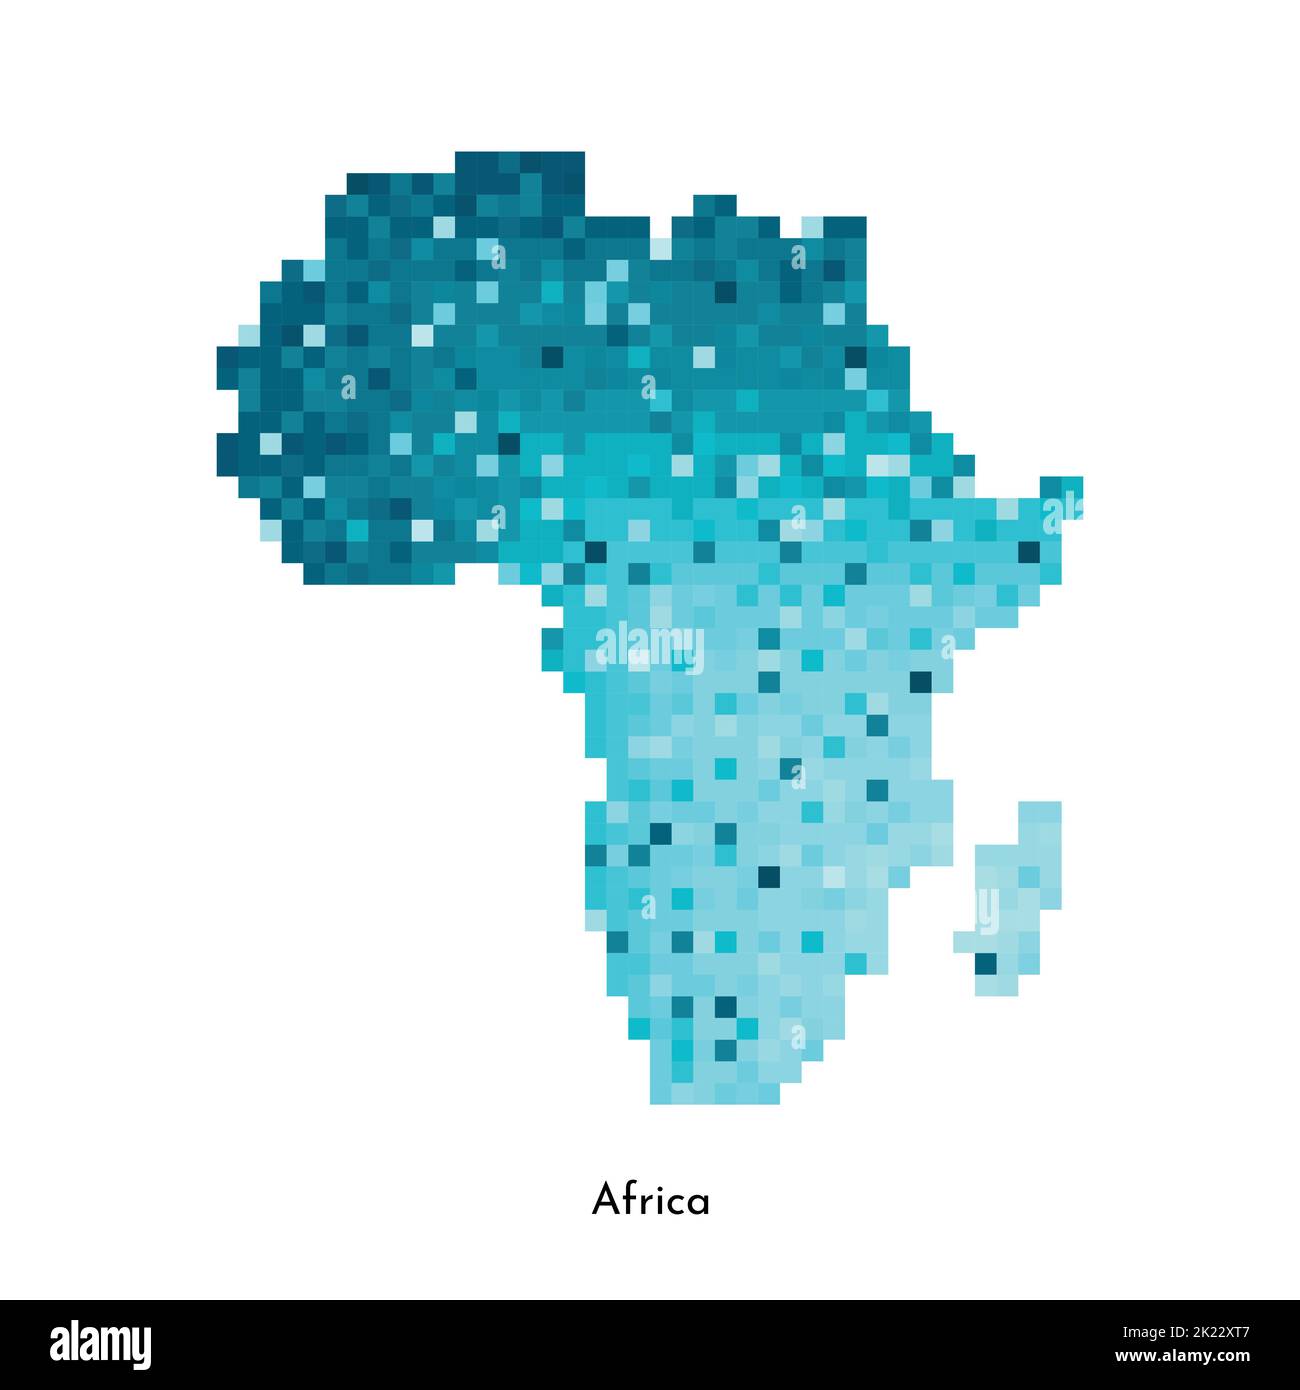 Vector isolated geometric illustration with simplified icy blue silhouette of Africa continent map. Pixel art style for NFT template. Dotted logo with Stock Vector